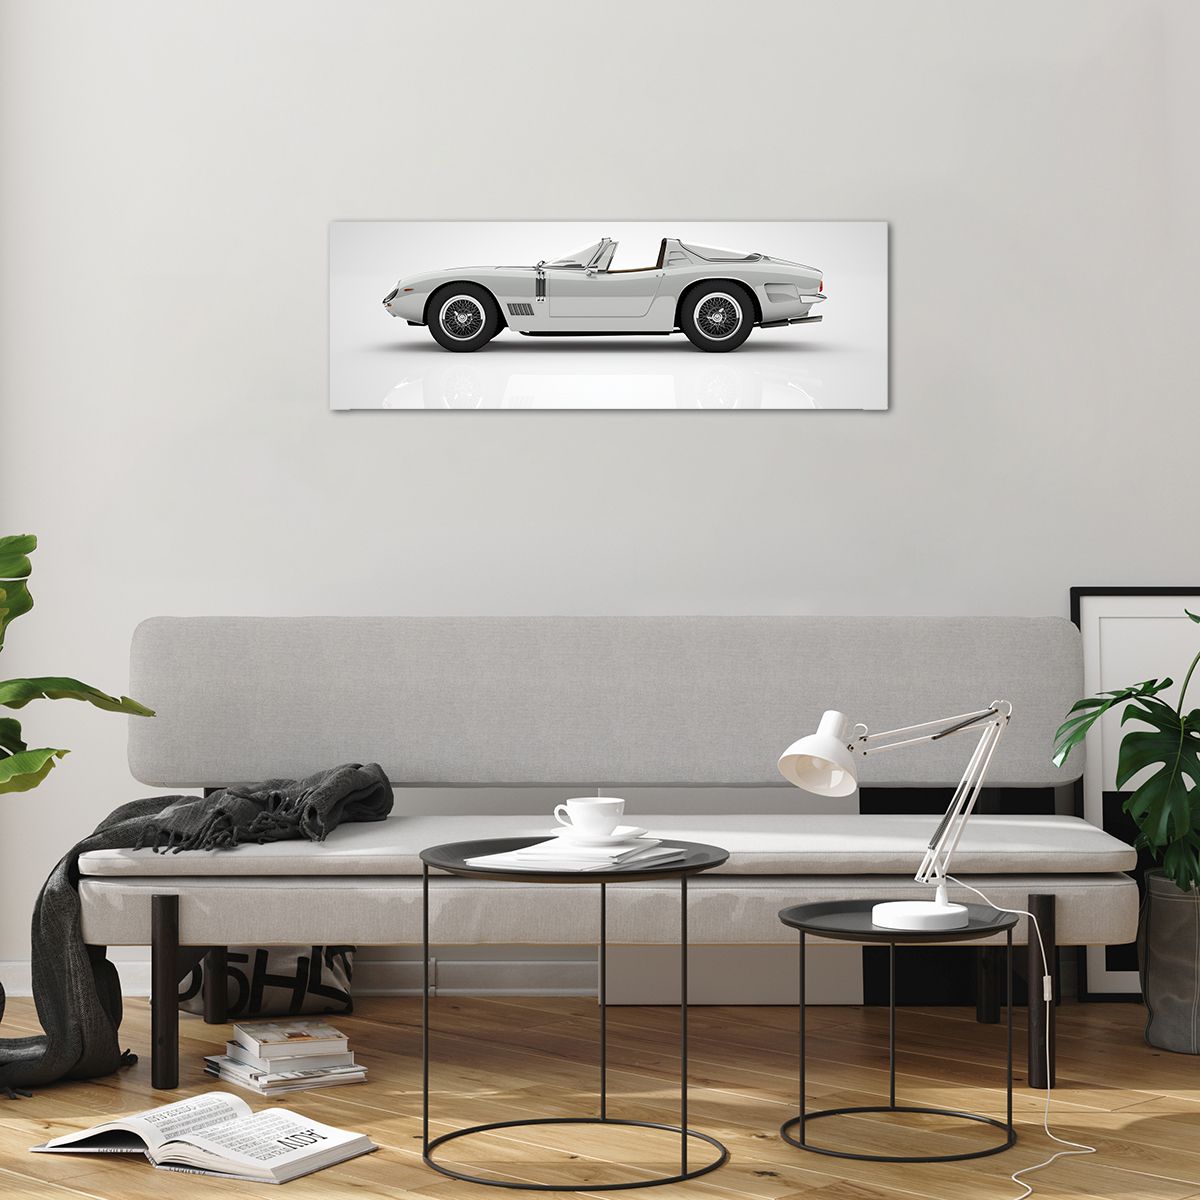 Glass picture  Sports Car, Glass picture  Cabriolet, Glass picture  Automotive, Glass picture  Journey, Glass picture  Vintage